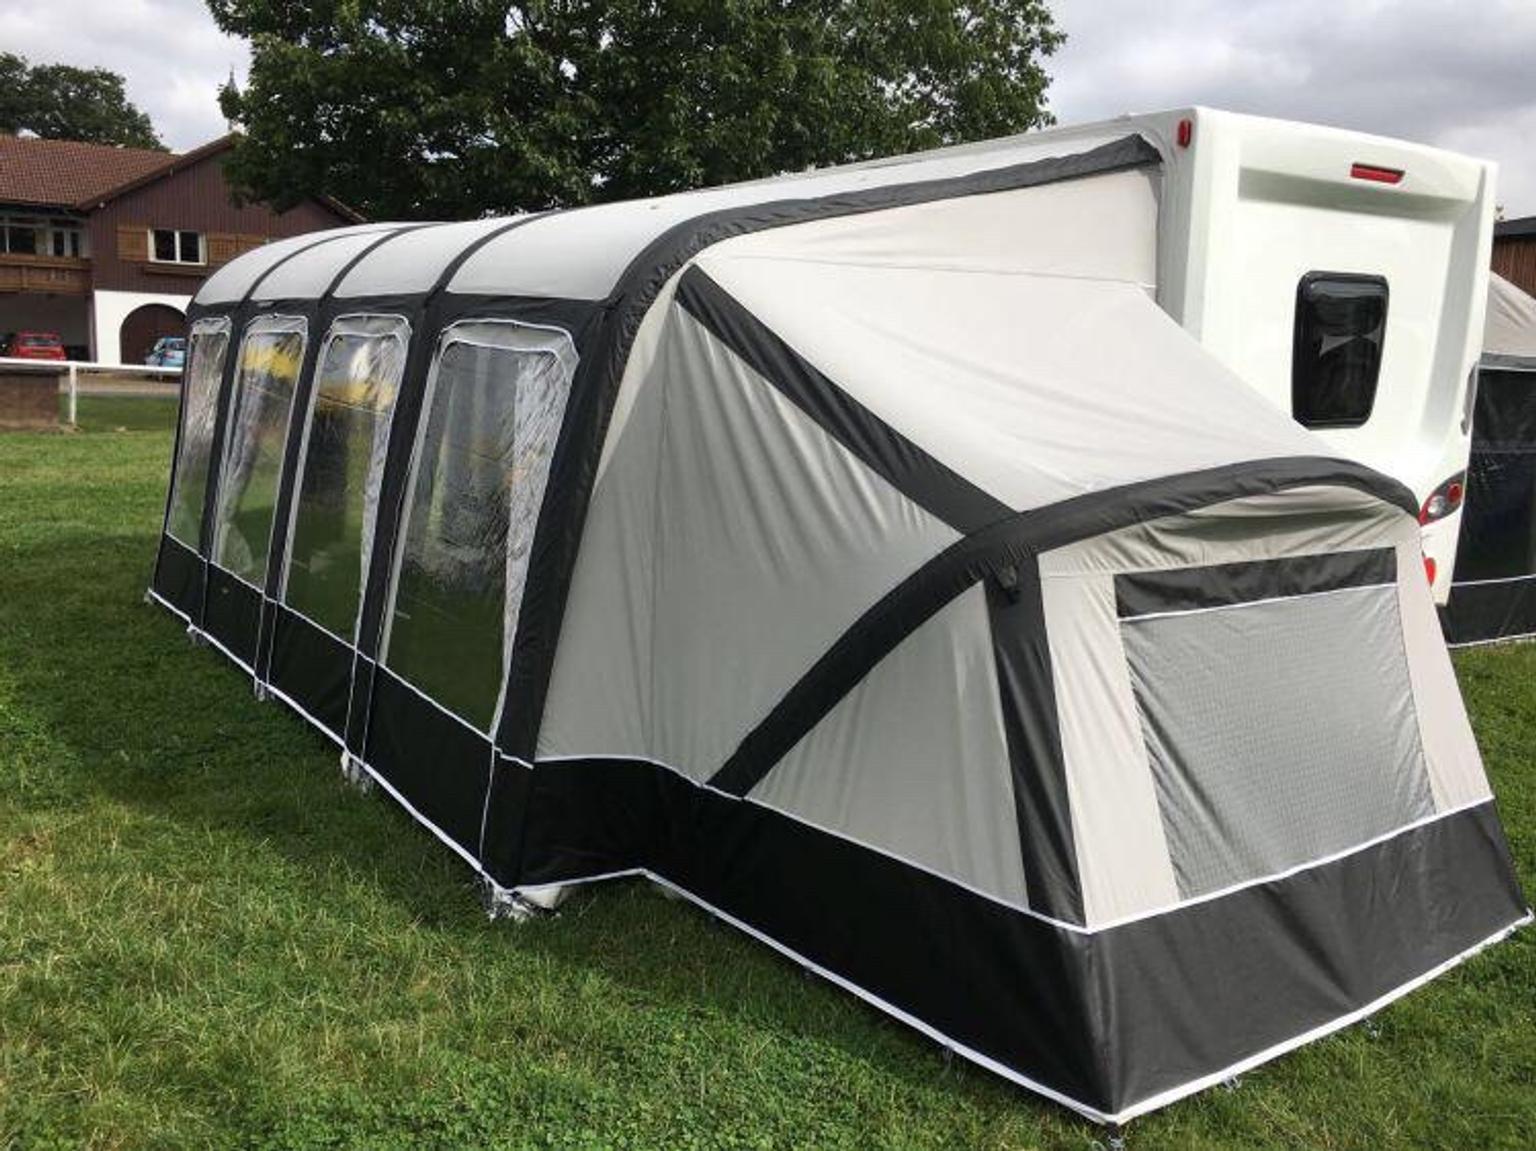 Bradcot Modul Air Awning In Fylde For 775 00 For Sale Shpock